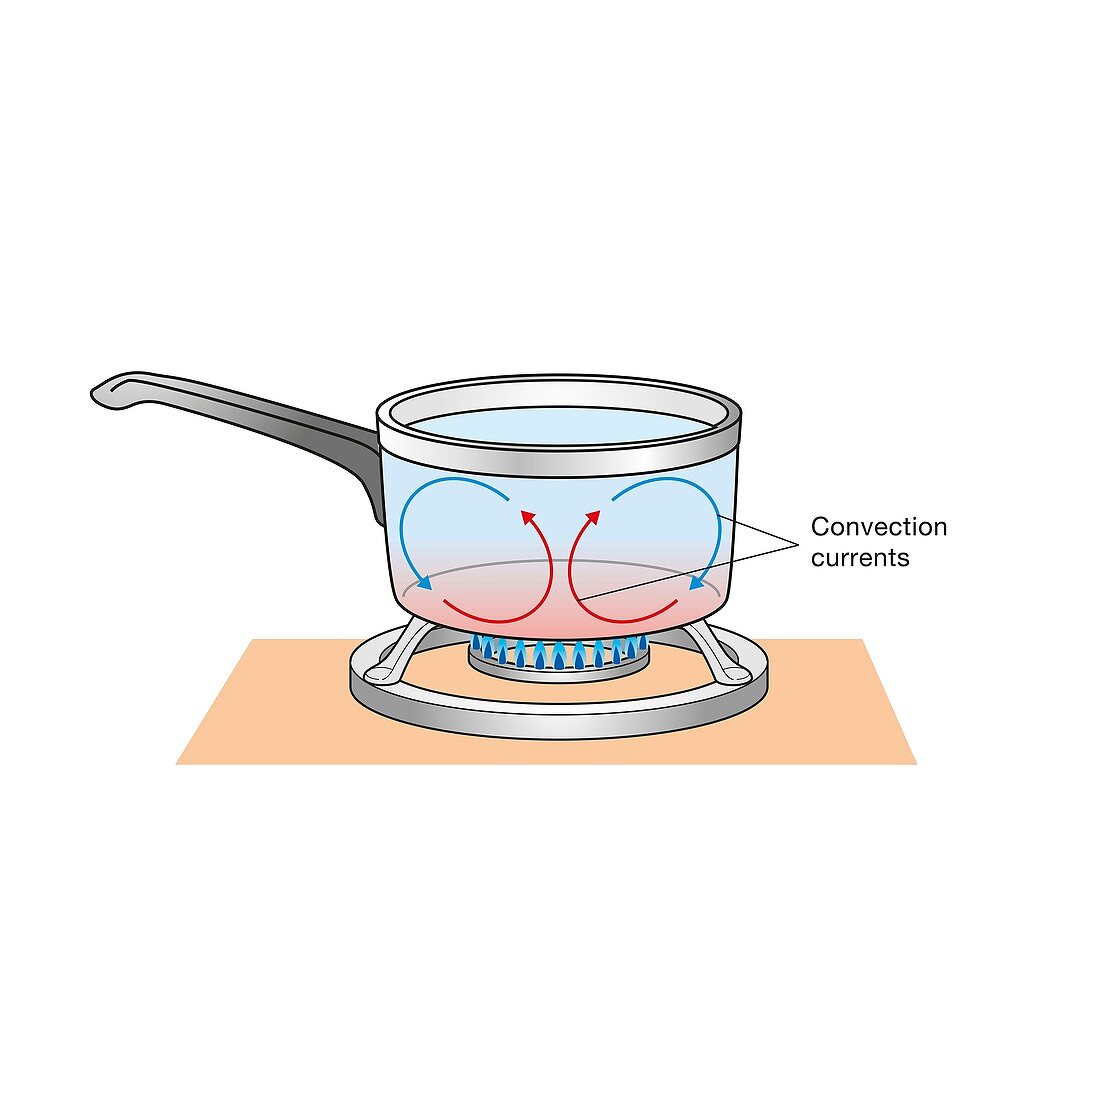 Convection currents in a saucepan, illustration